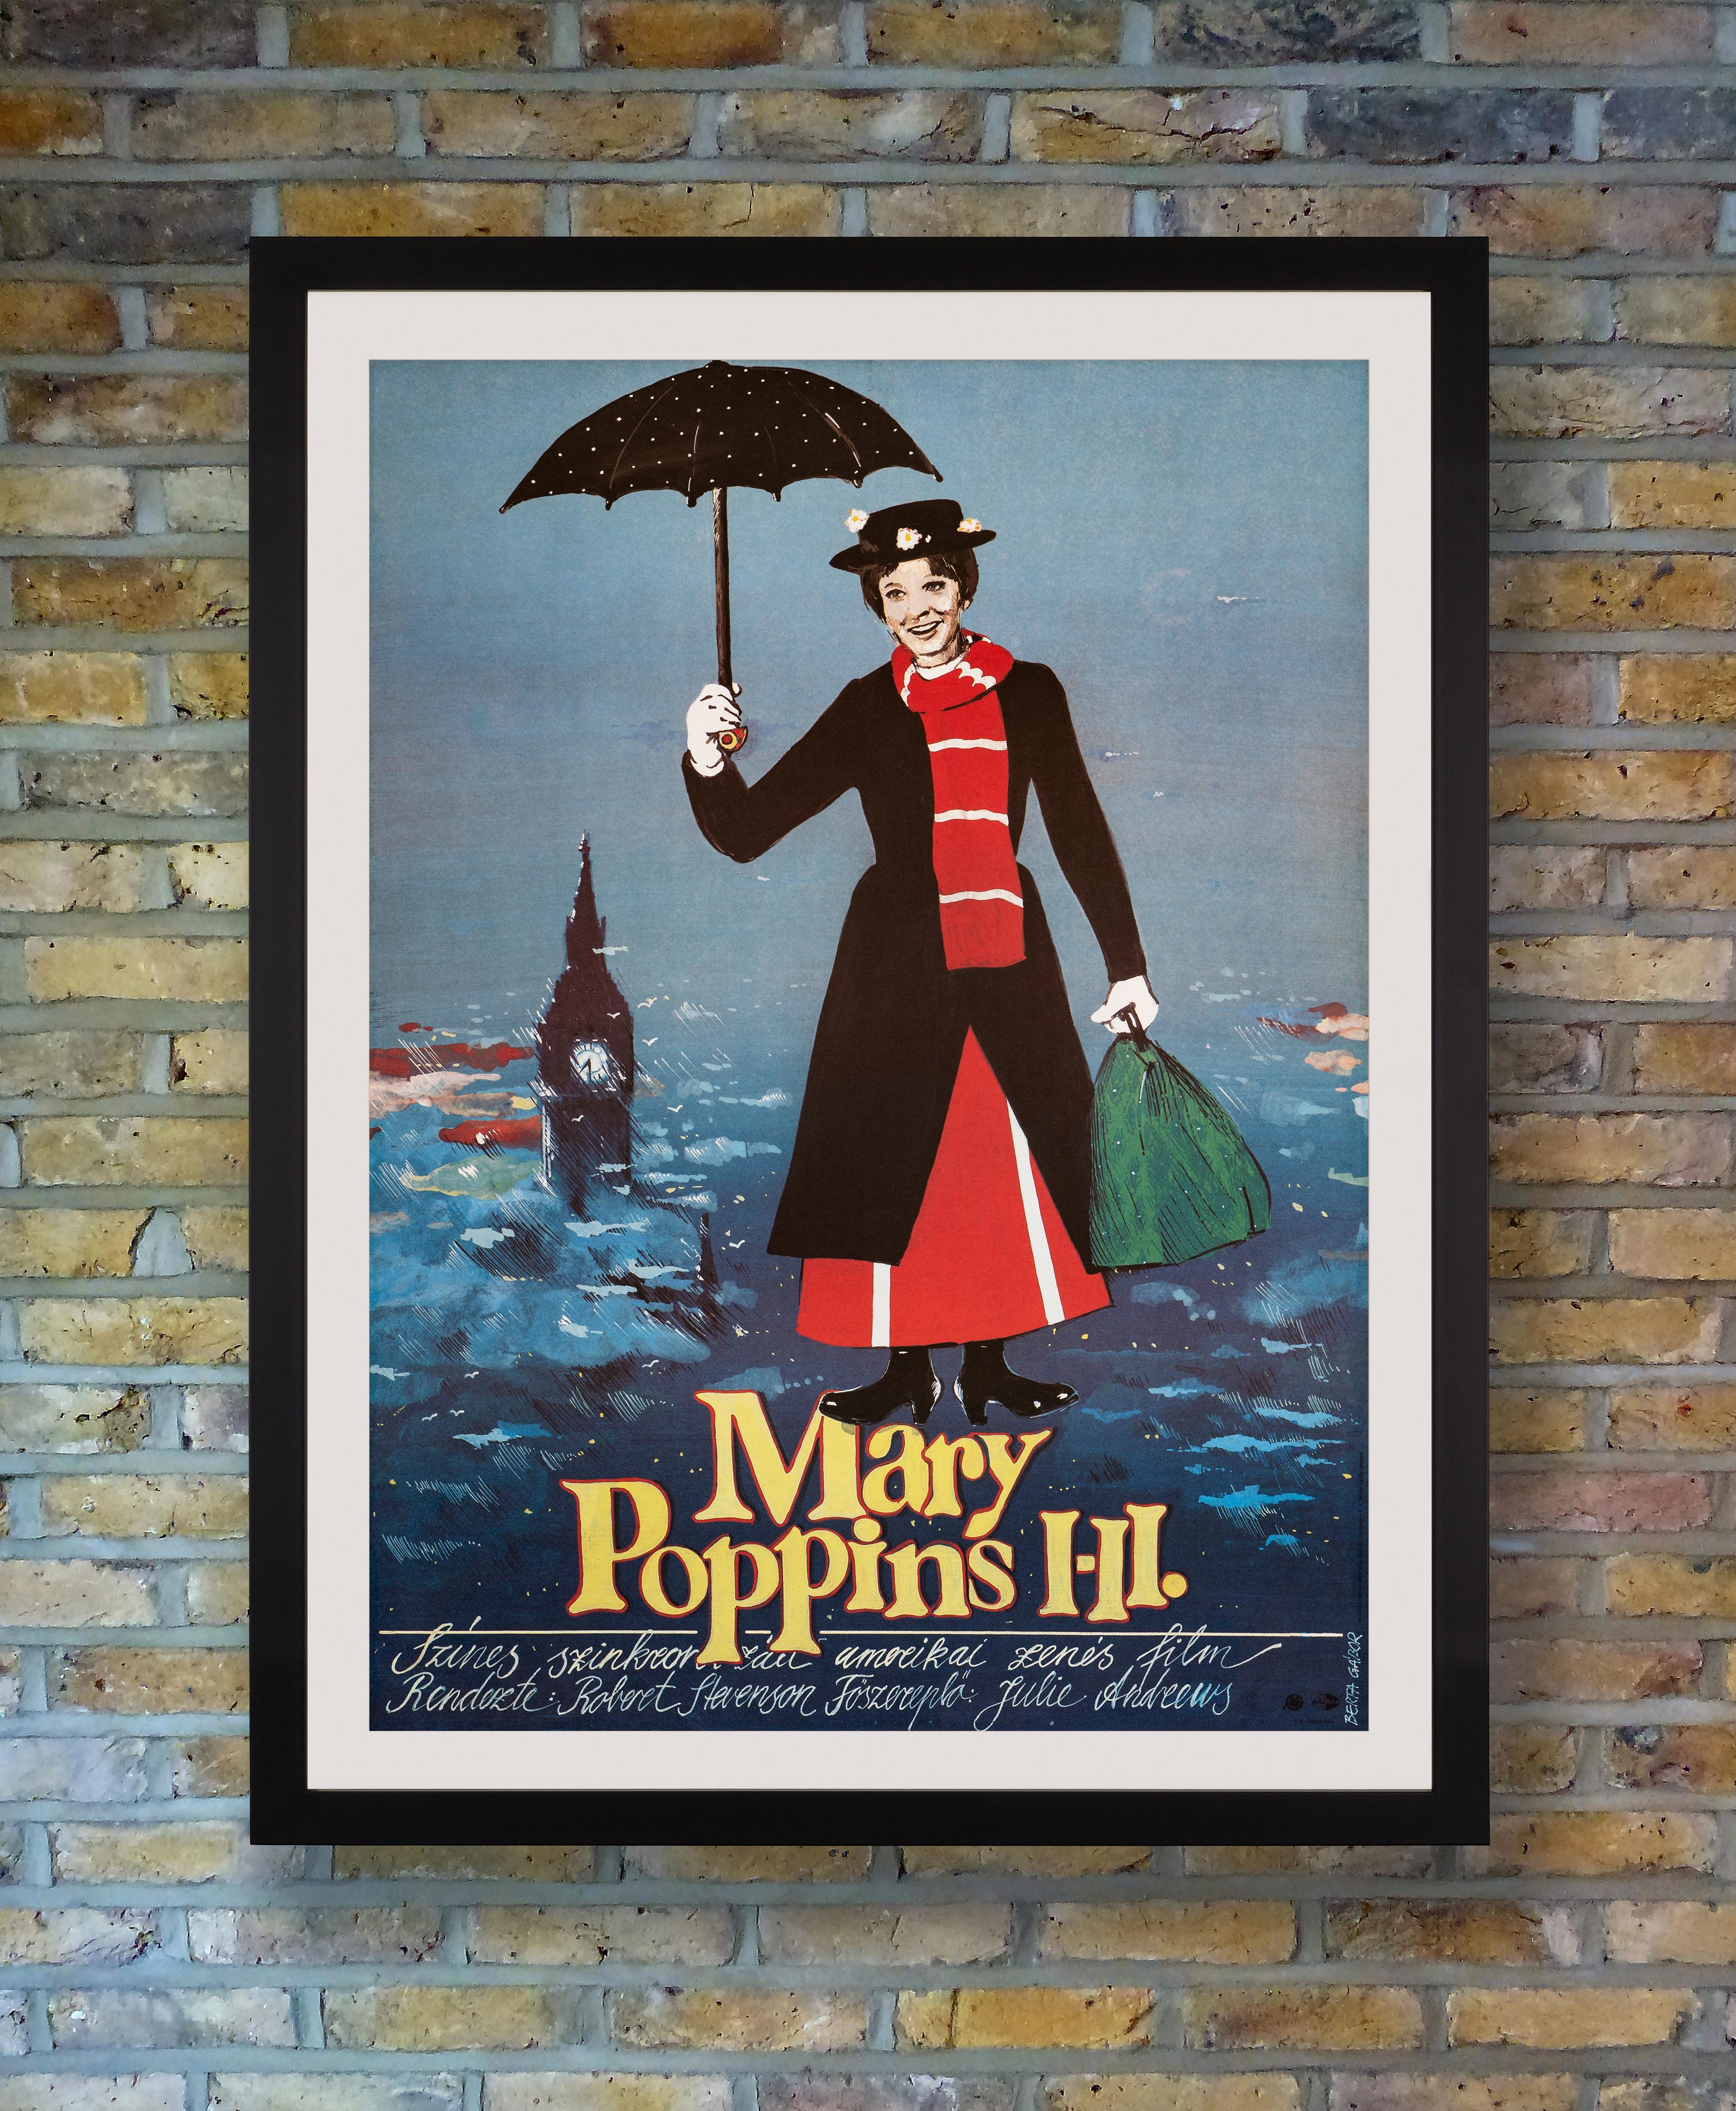 With her trusty umbrella, Mary Poppins gracefully soars above the misty London skyline on this enchanting poster for the first Hungarian release of Walt Disney's Classic musical fantasy in 1986. Although Western films were shown during the Soviet